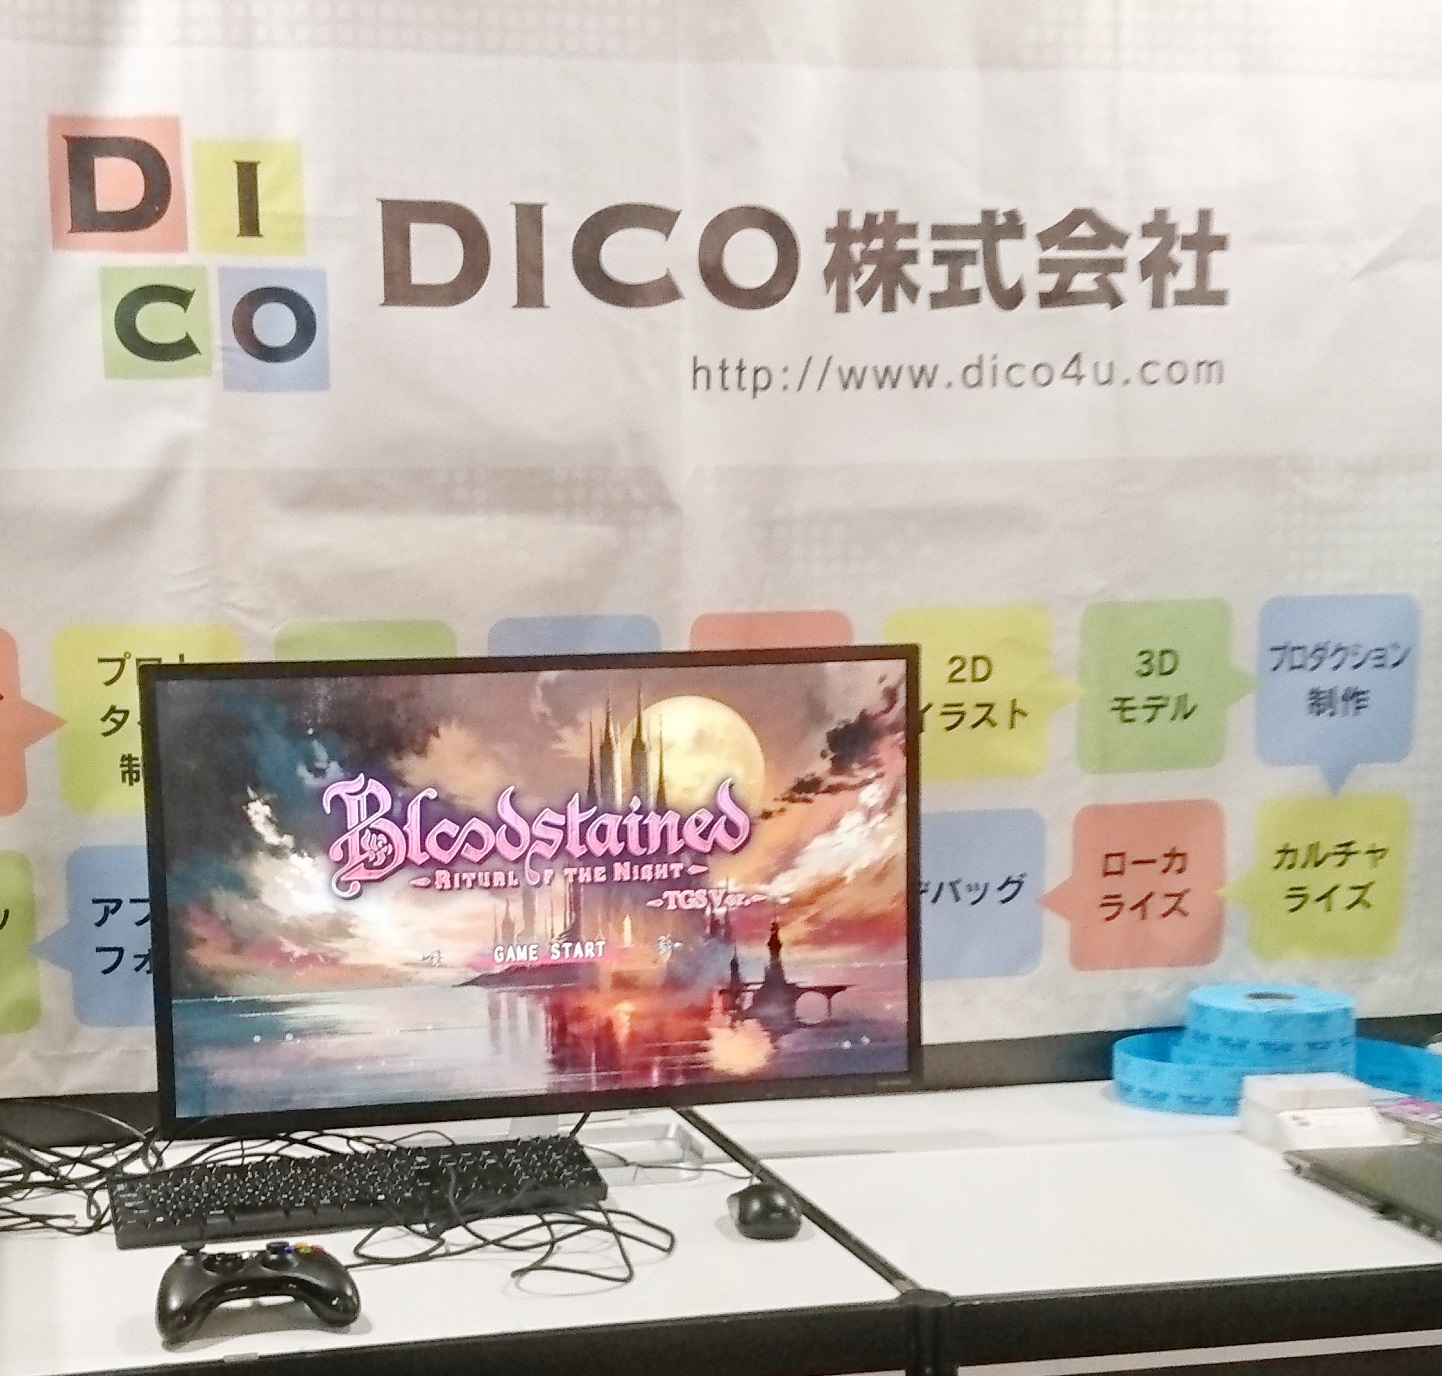 DICO Co., Ltd. exhibits Bloodstained: Ritual of the Night produced by ArtPlay Inc. at Tokyo Game Show 2017